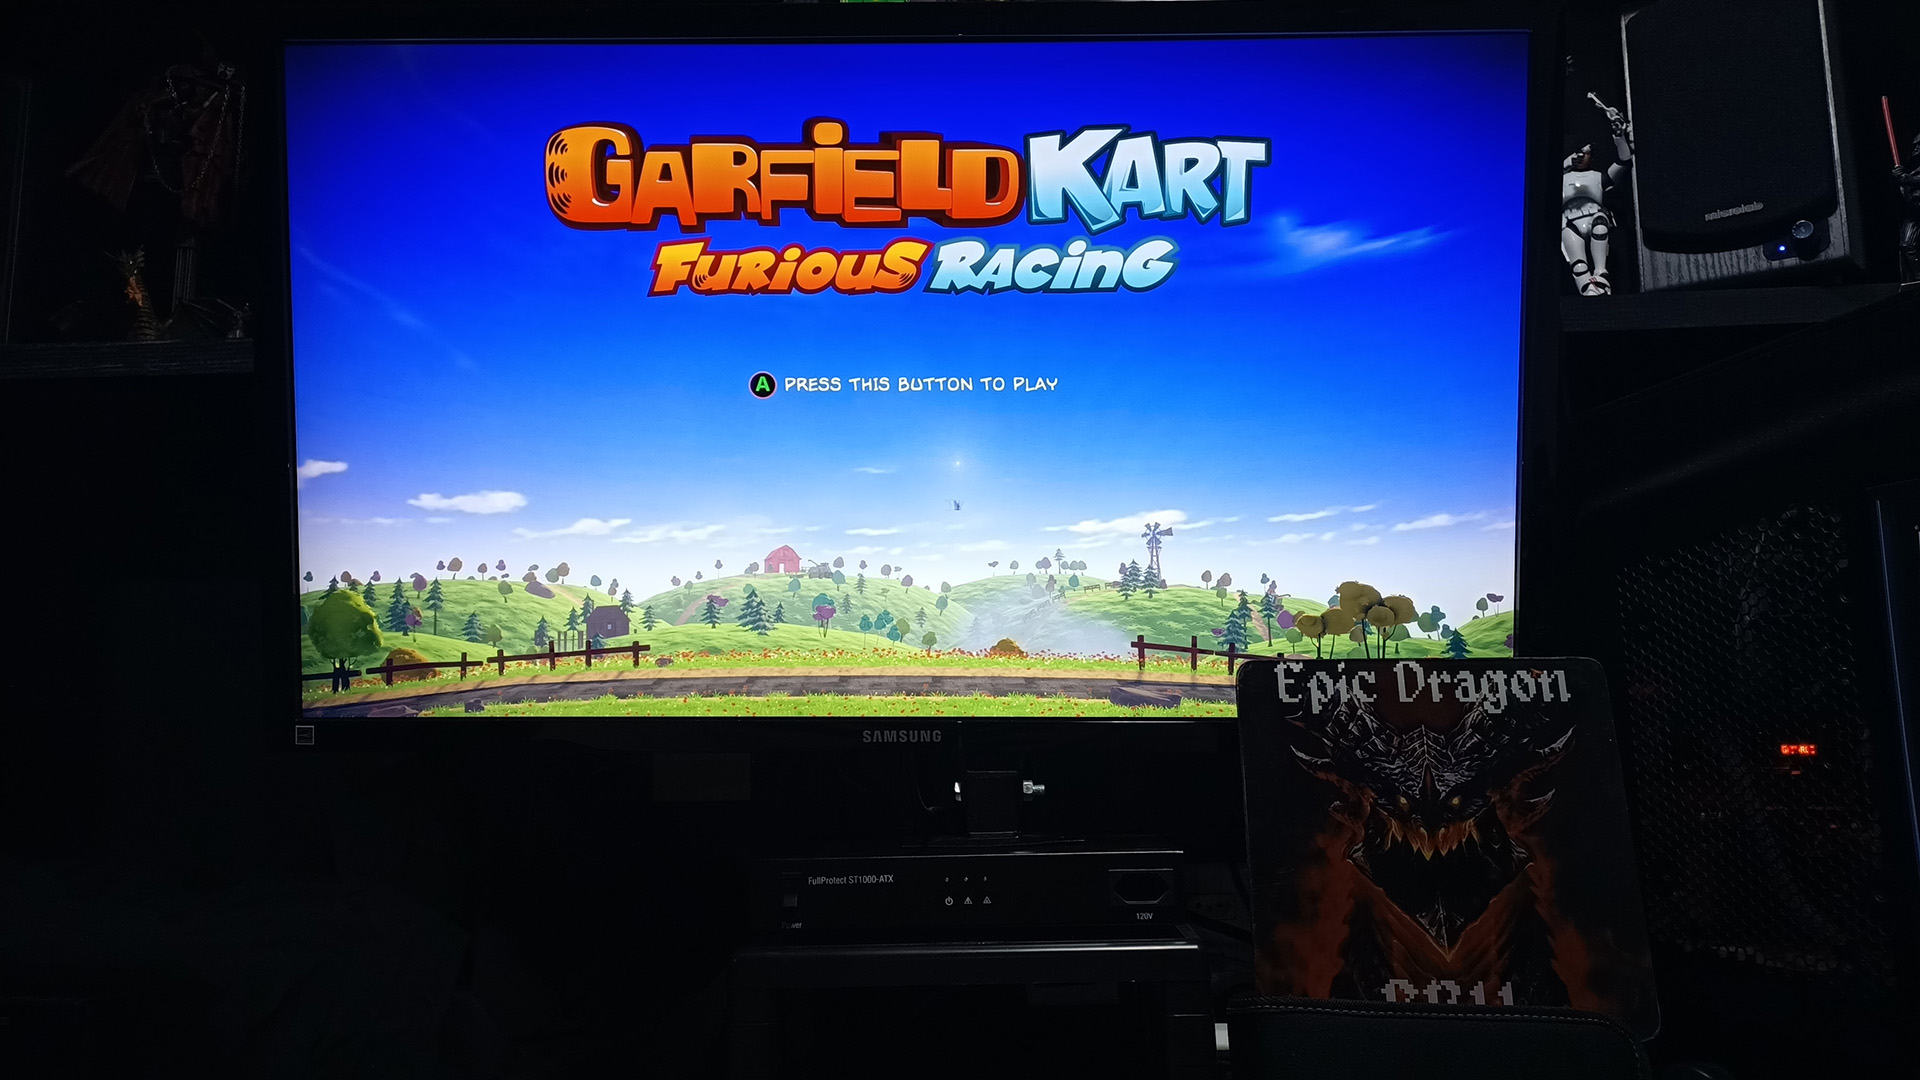 EpicDragon: Garfield Kart Furious Racing: Catz In The Hood [Time Trial: 3 Laps] (PC) 0:01:22.602 points on 2022-08-05 17:26:49